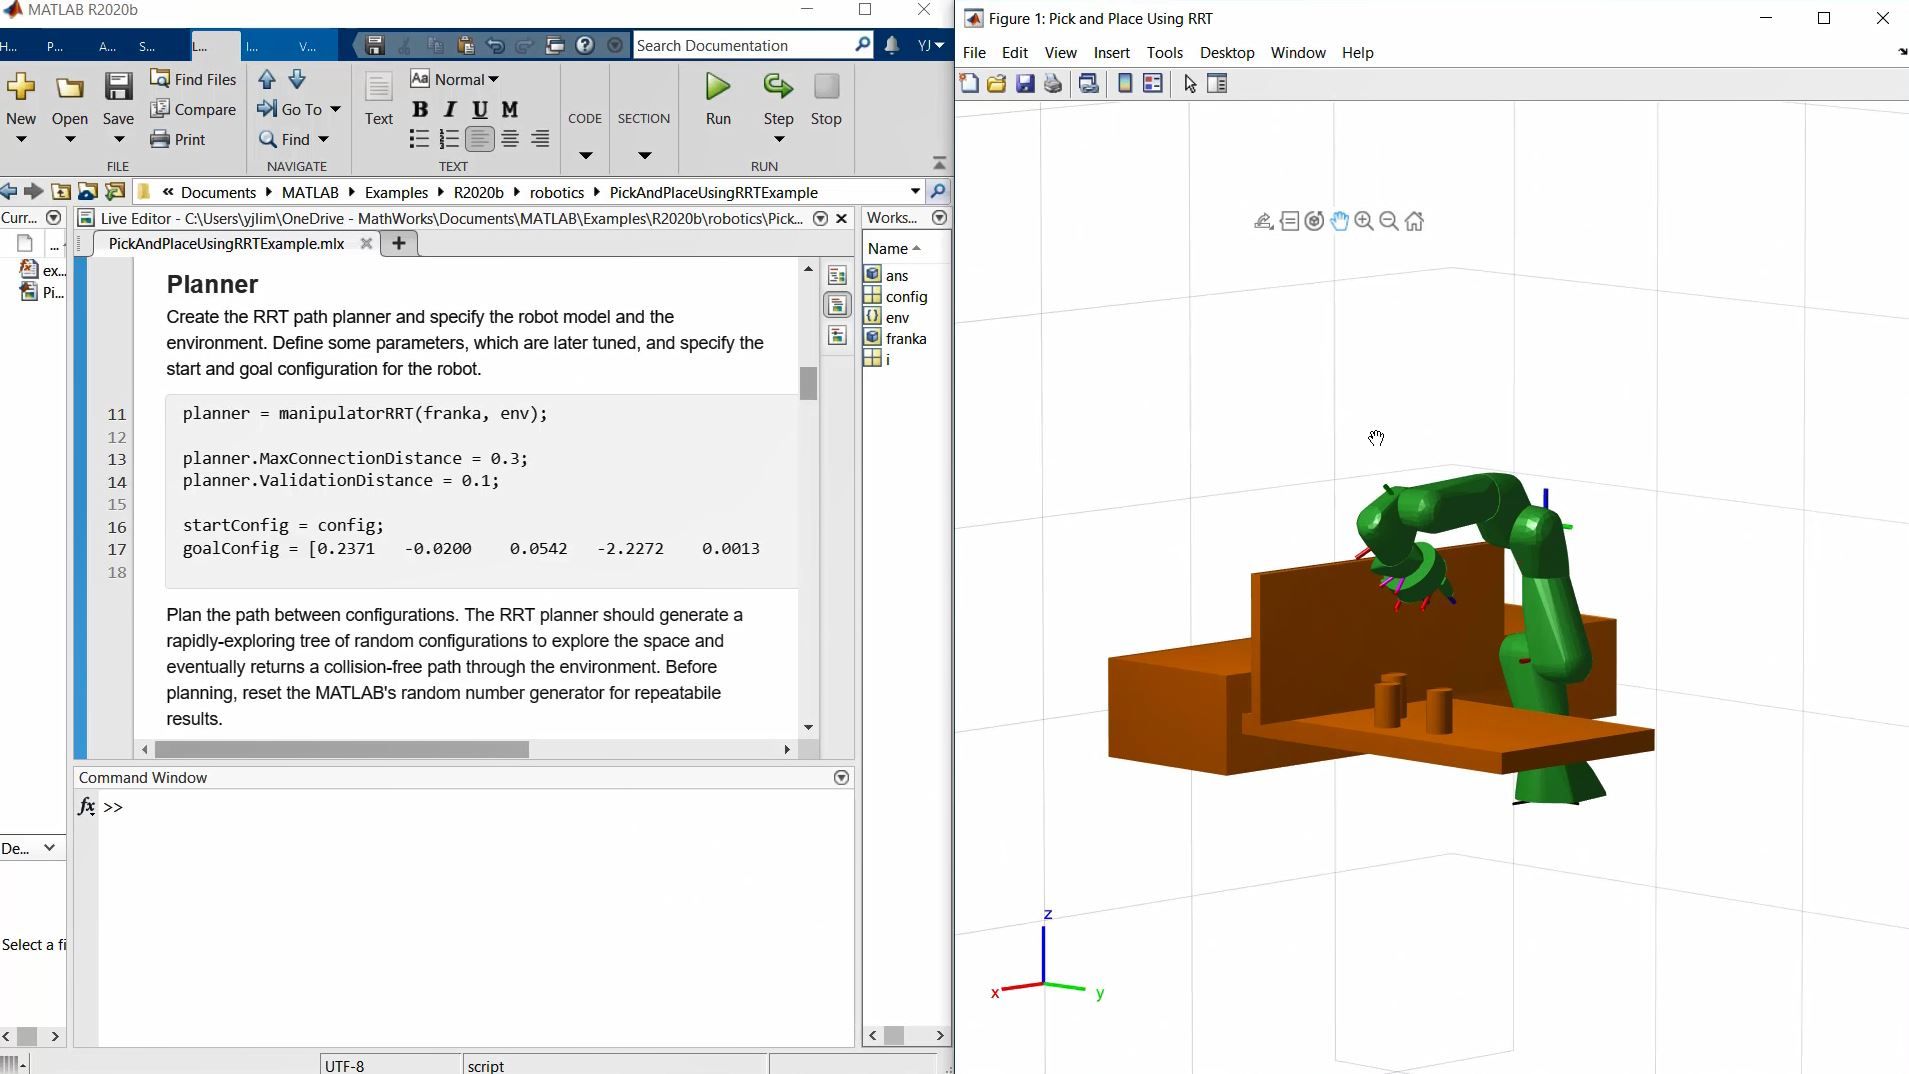 Learn about the bi-directional rapidly-exploring random tree (RRT) algorithm for robot manipulators, and how to tune some of the parameters to design robot motion planners.